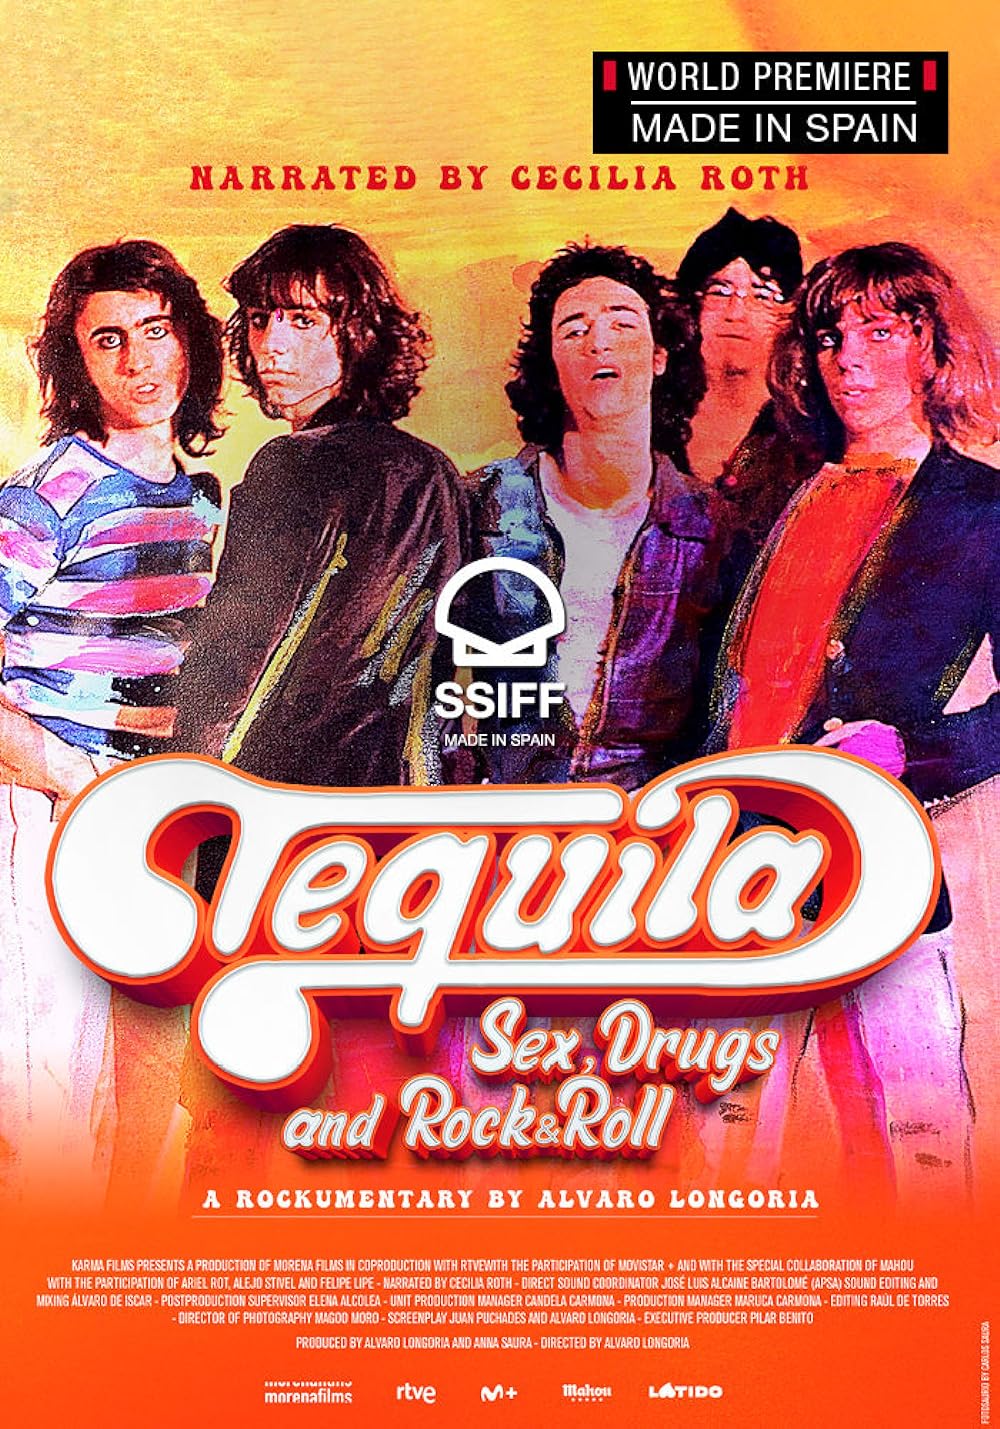 Tequila. Sexo, drogas y rock and roll